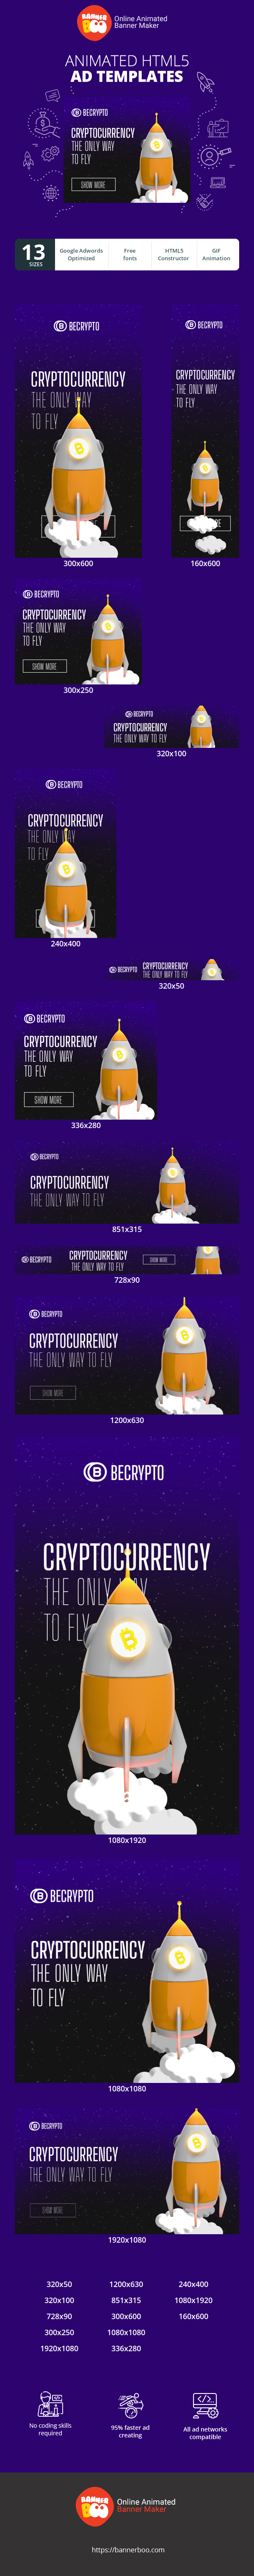 Шаблон рекламного банера — Cryptocurrency — The Only Way To Fly